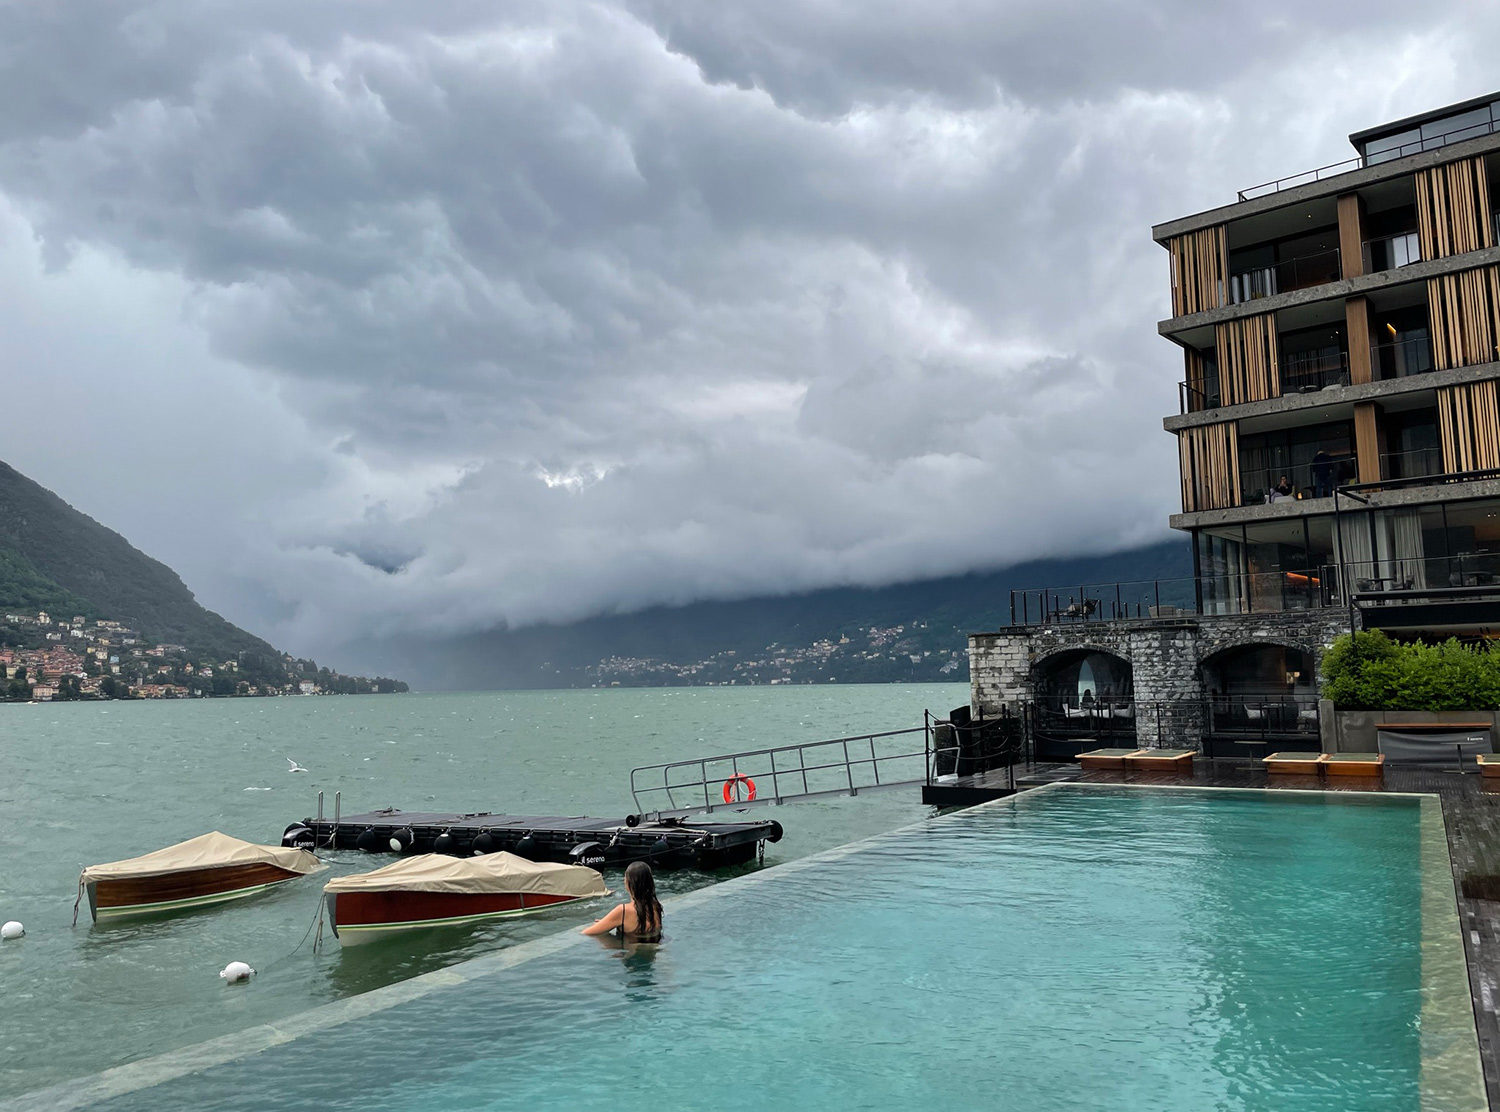 Il Sereno Stormy days during our stay but I must say it made the scenery even more evocative. And a good heated pool never hurts...